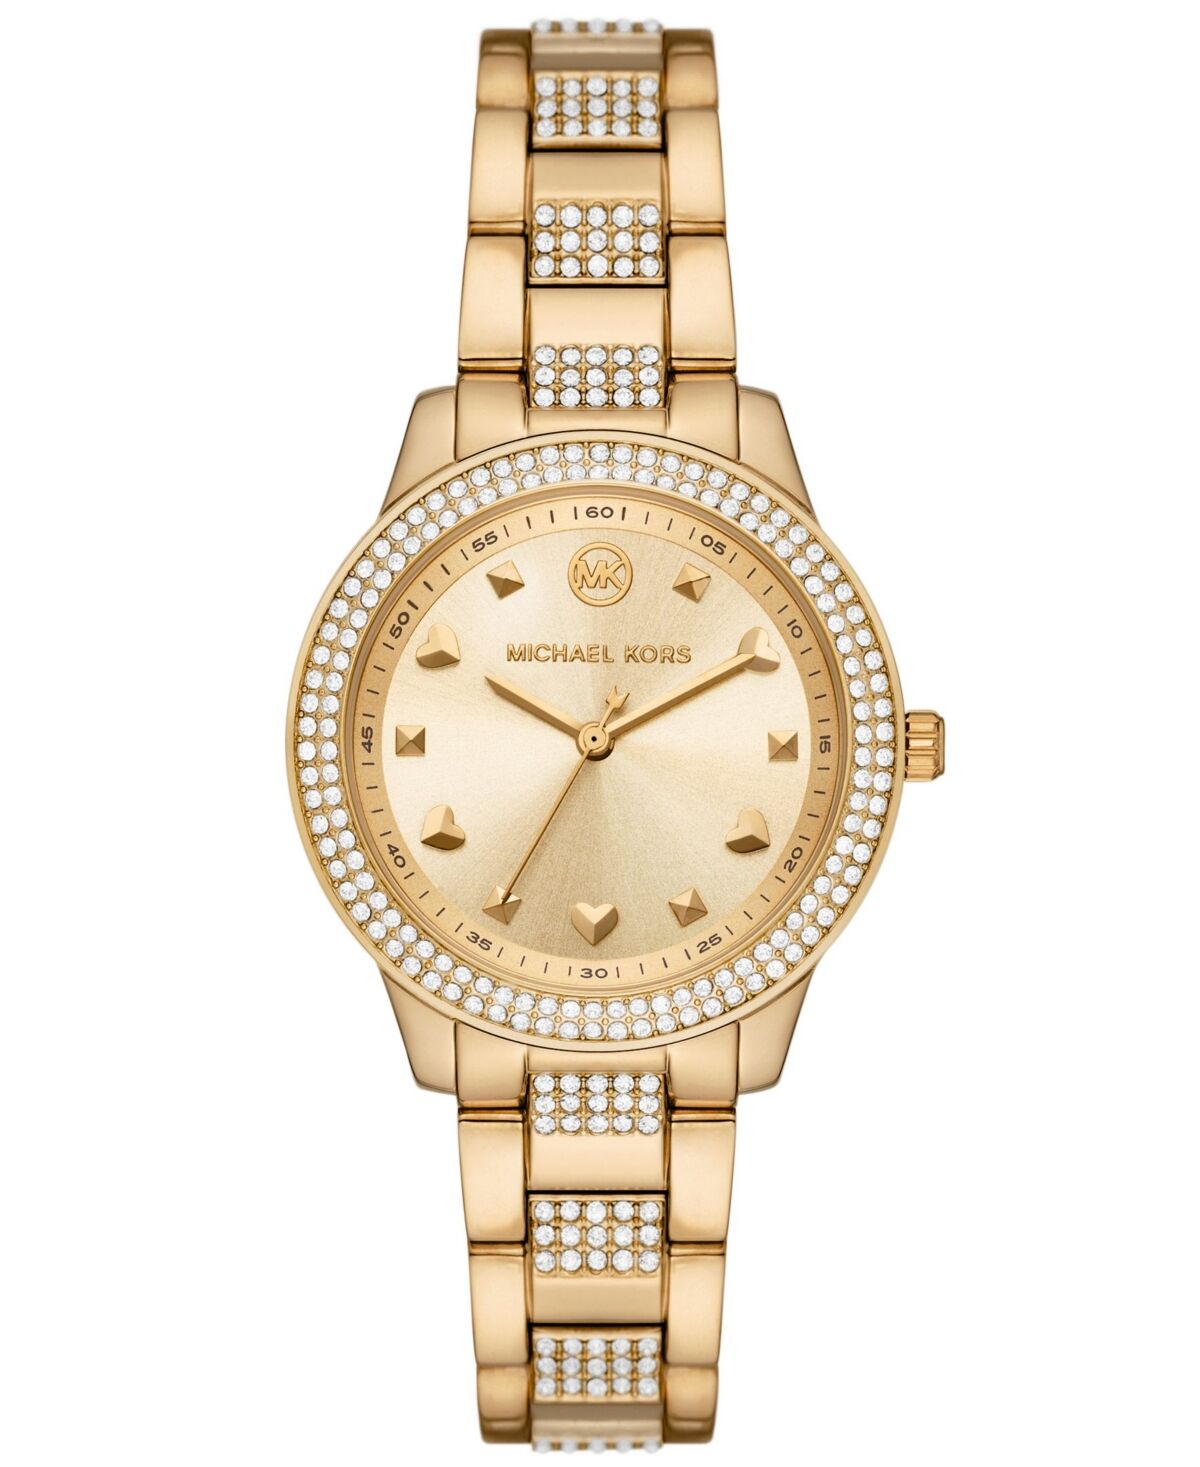 Michael Kors Women's Tibby Three-Hand Gold-Tone Stainless Steel Watch 34mm and Bracelet Gift Set - Gold-Tone